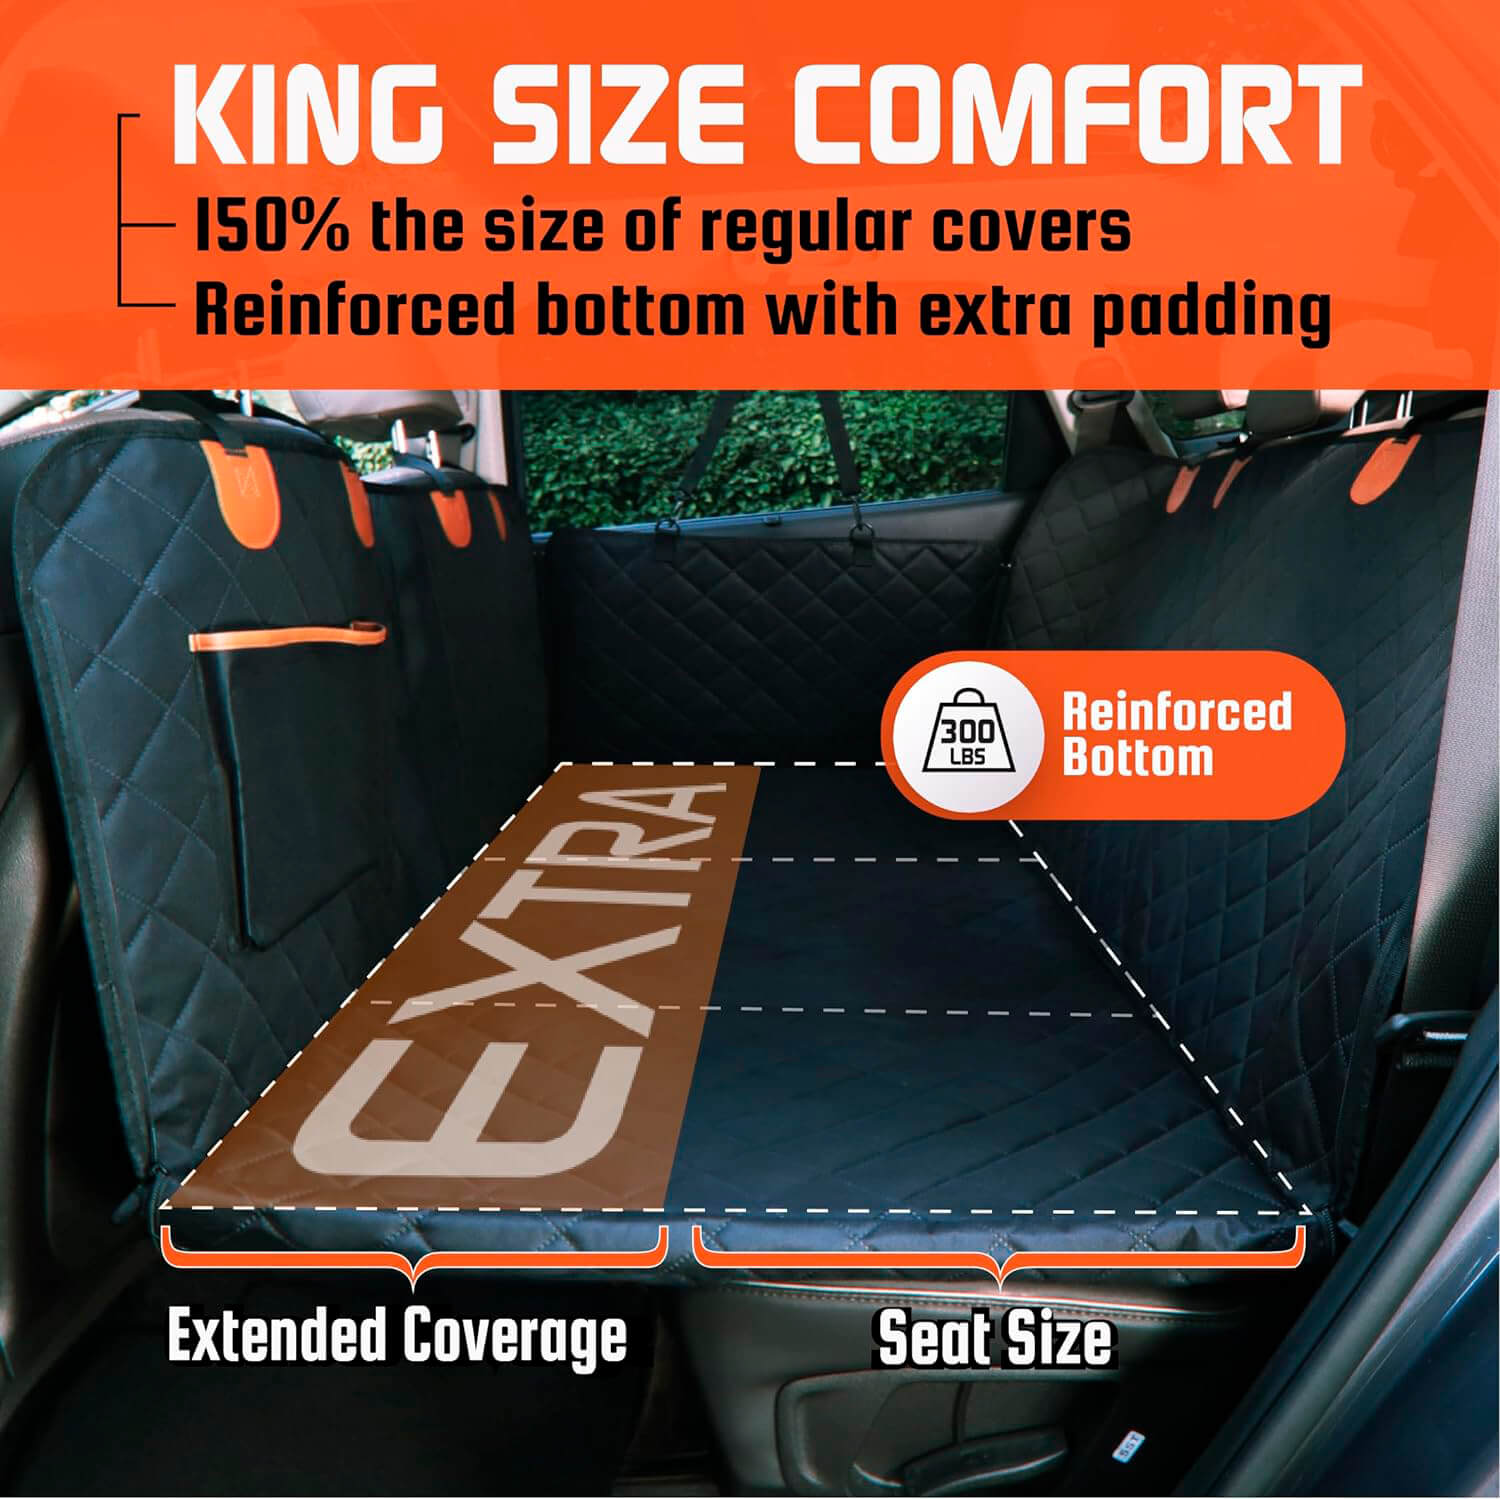 Professional Hard Bottom Seat Extender for Dogs